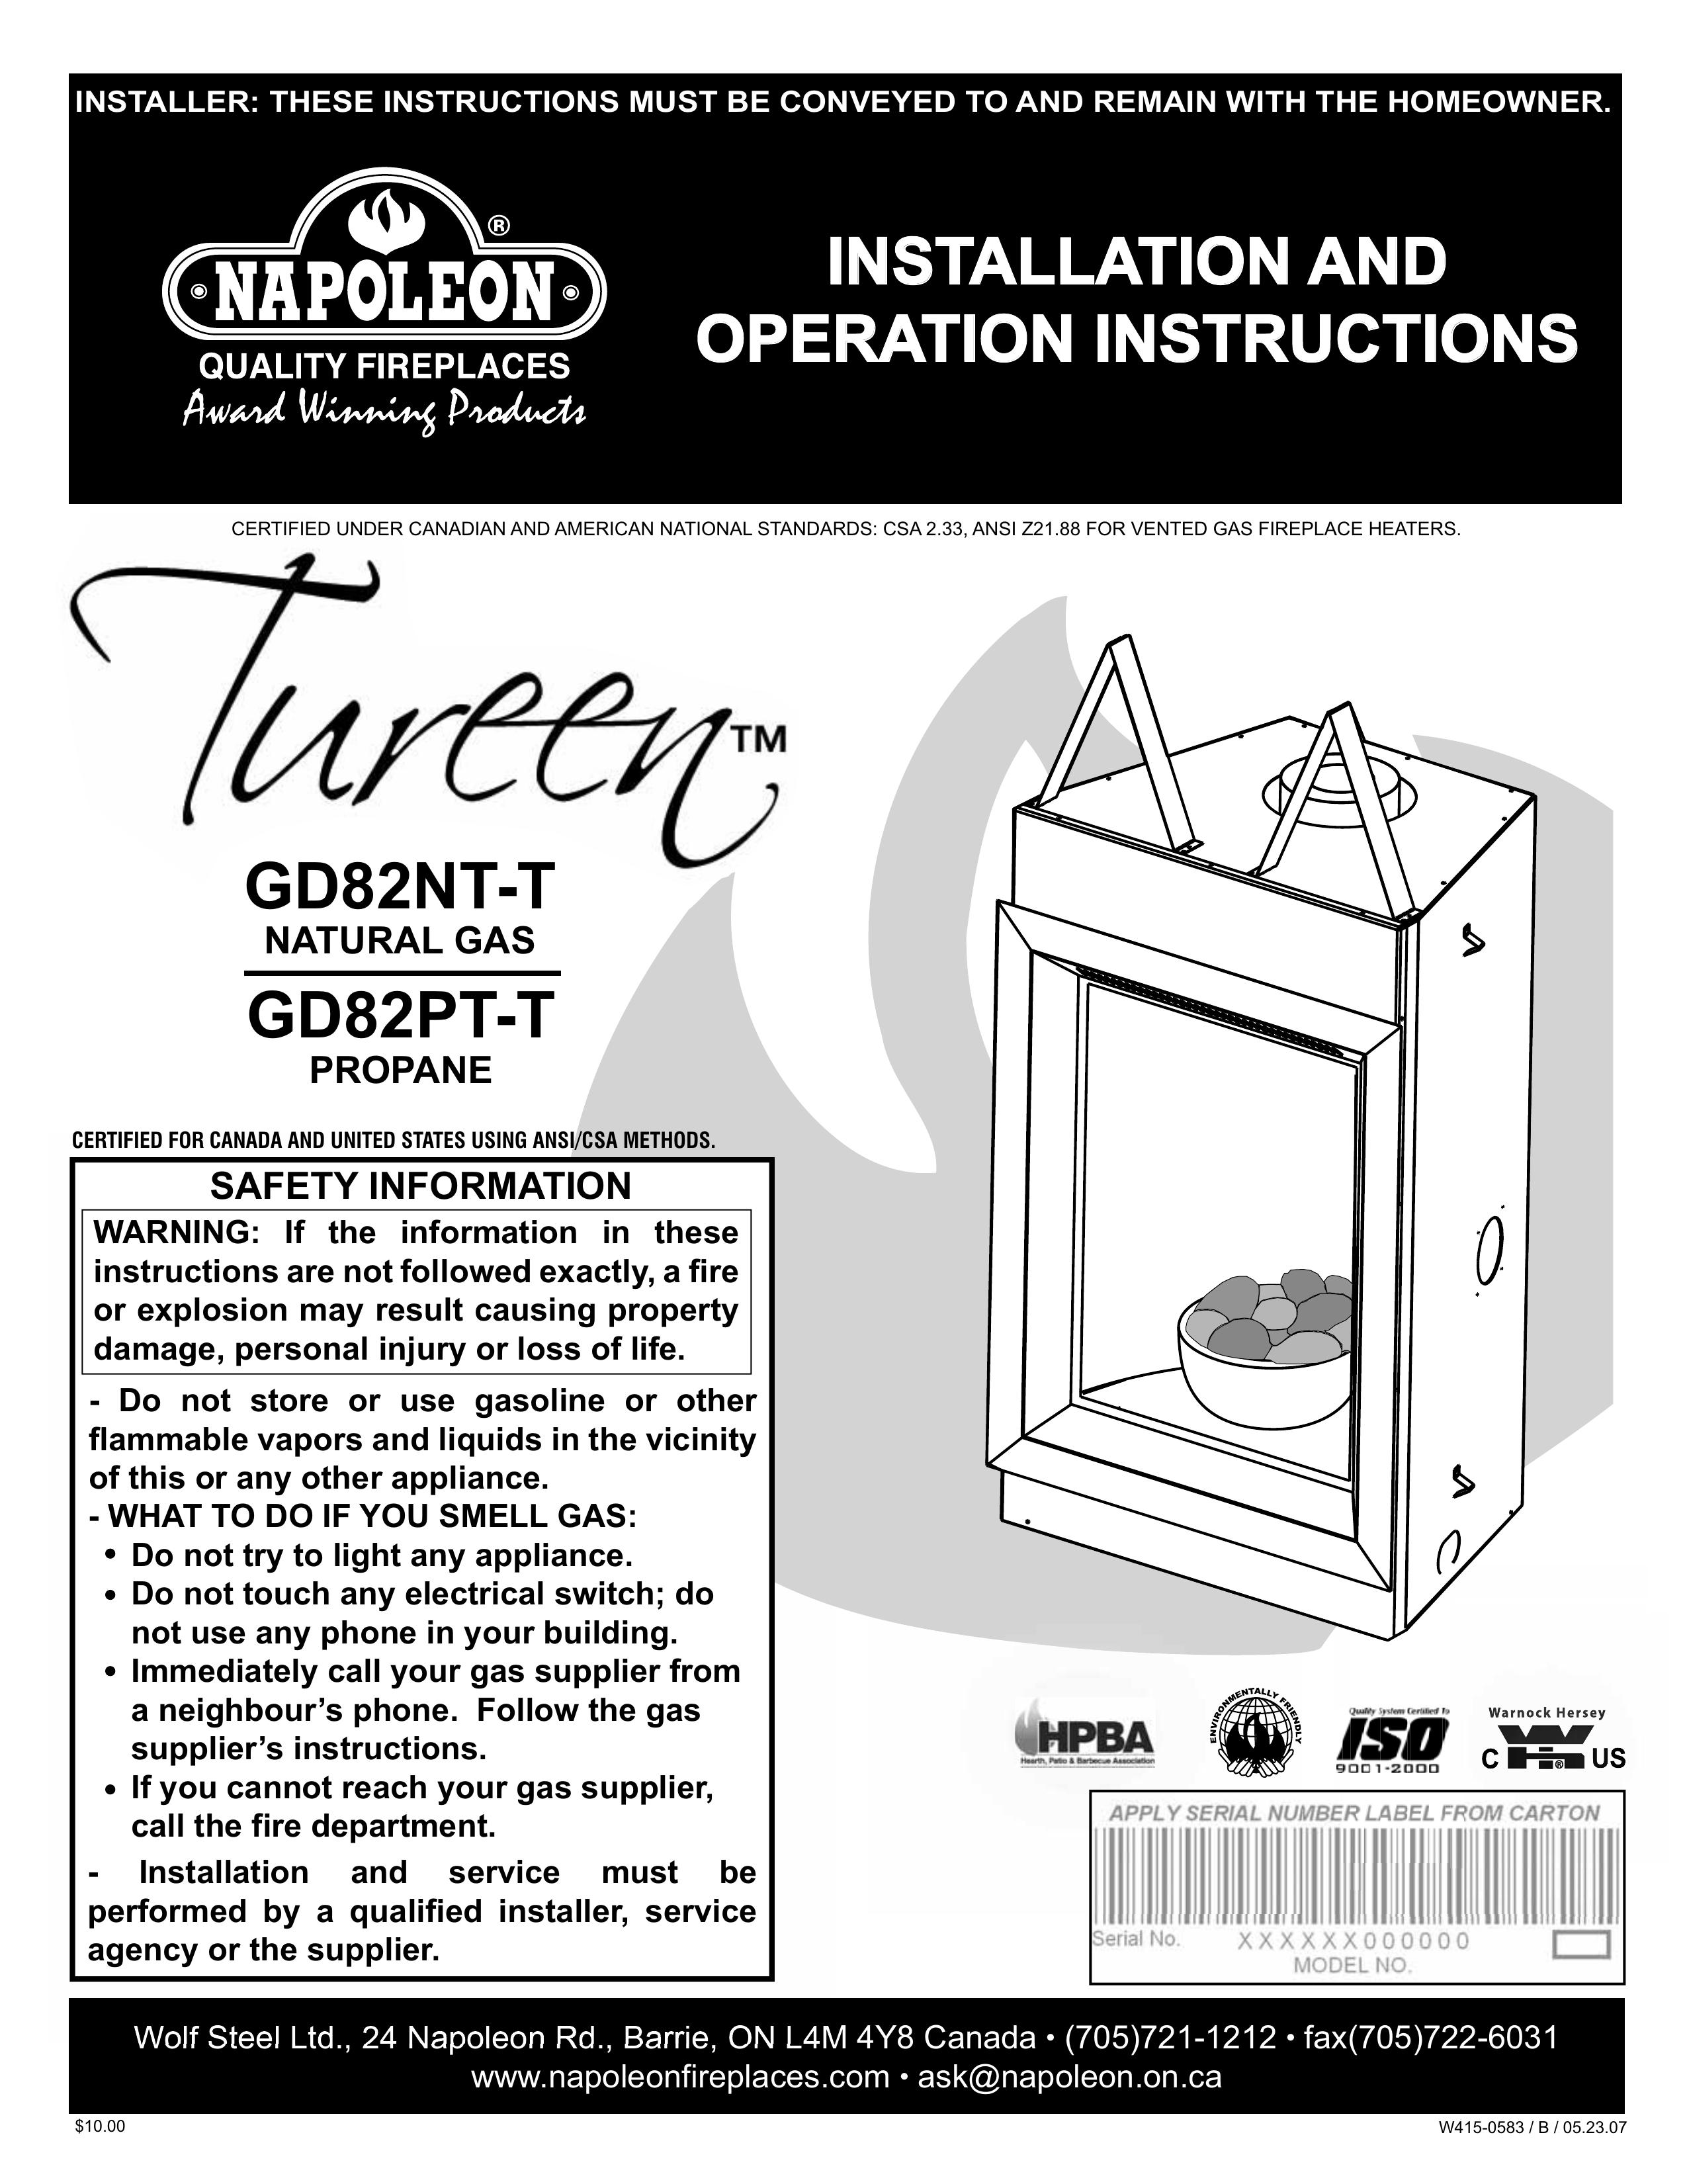 Napoleon Fireplaces GD82NT-T Fire Pit User Manual